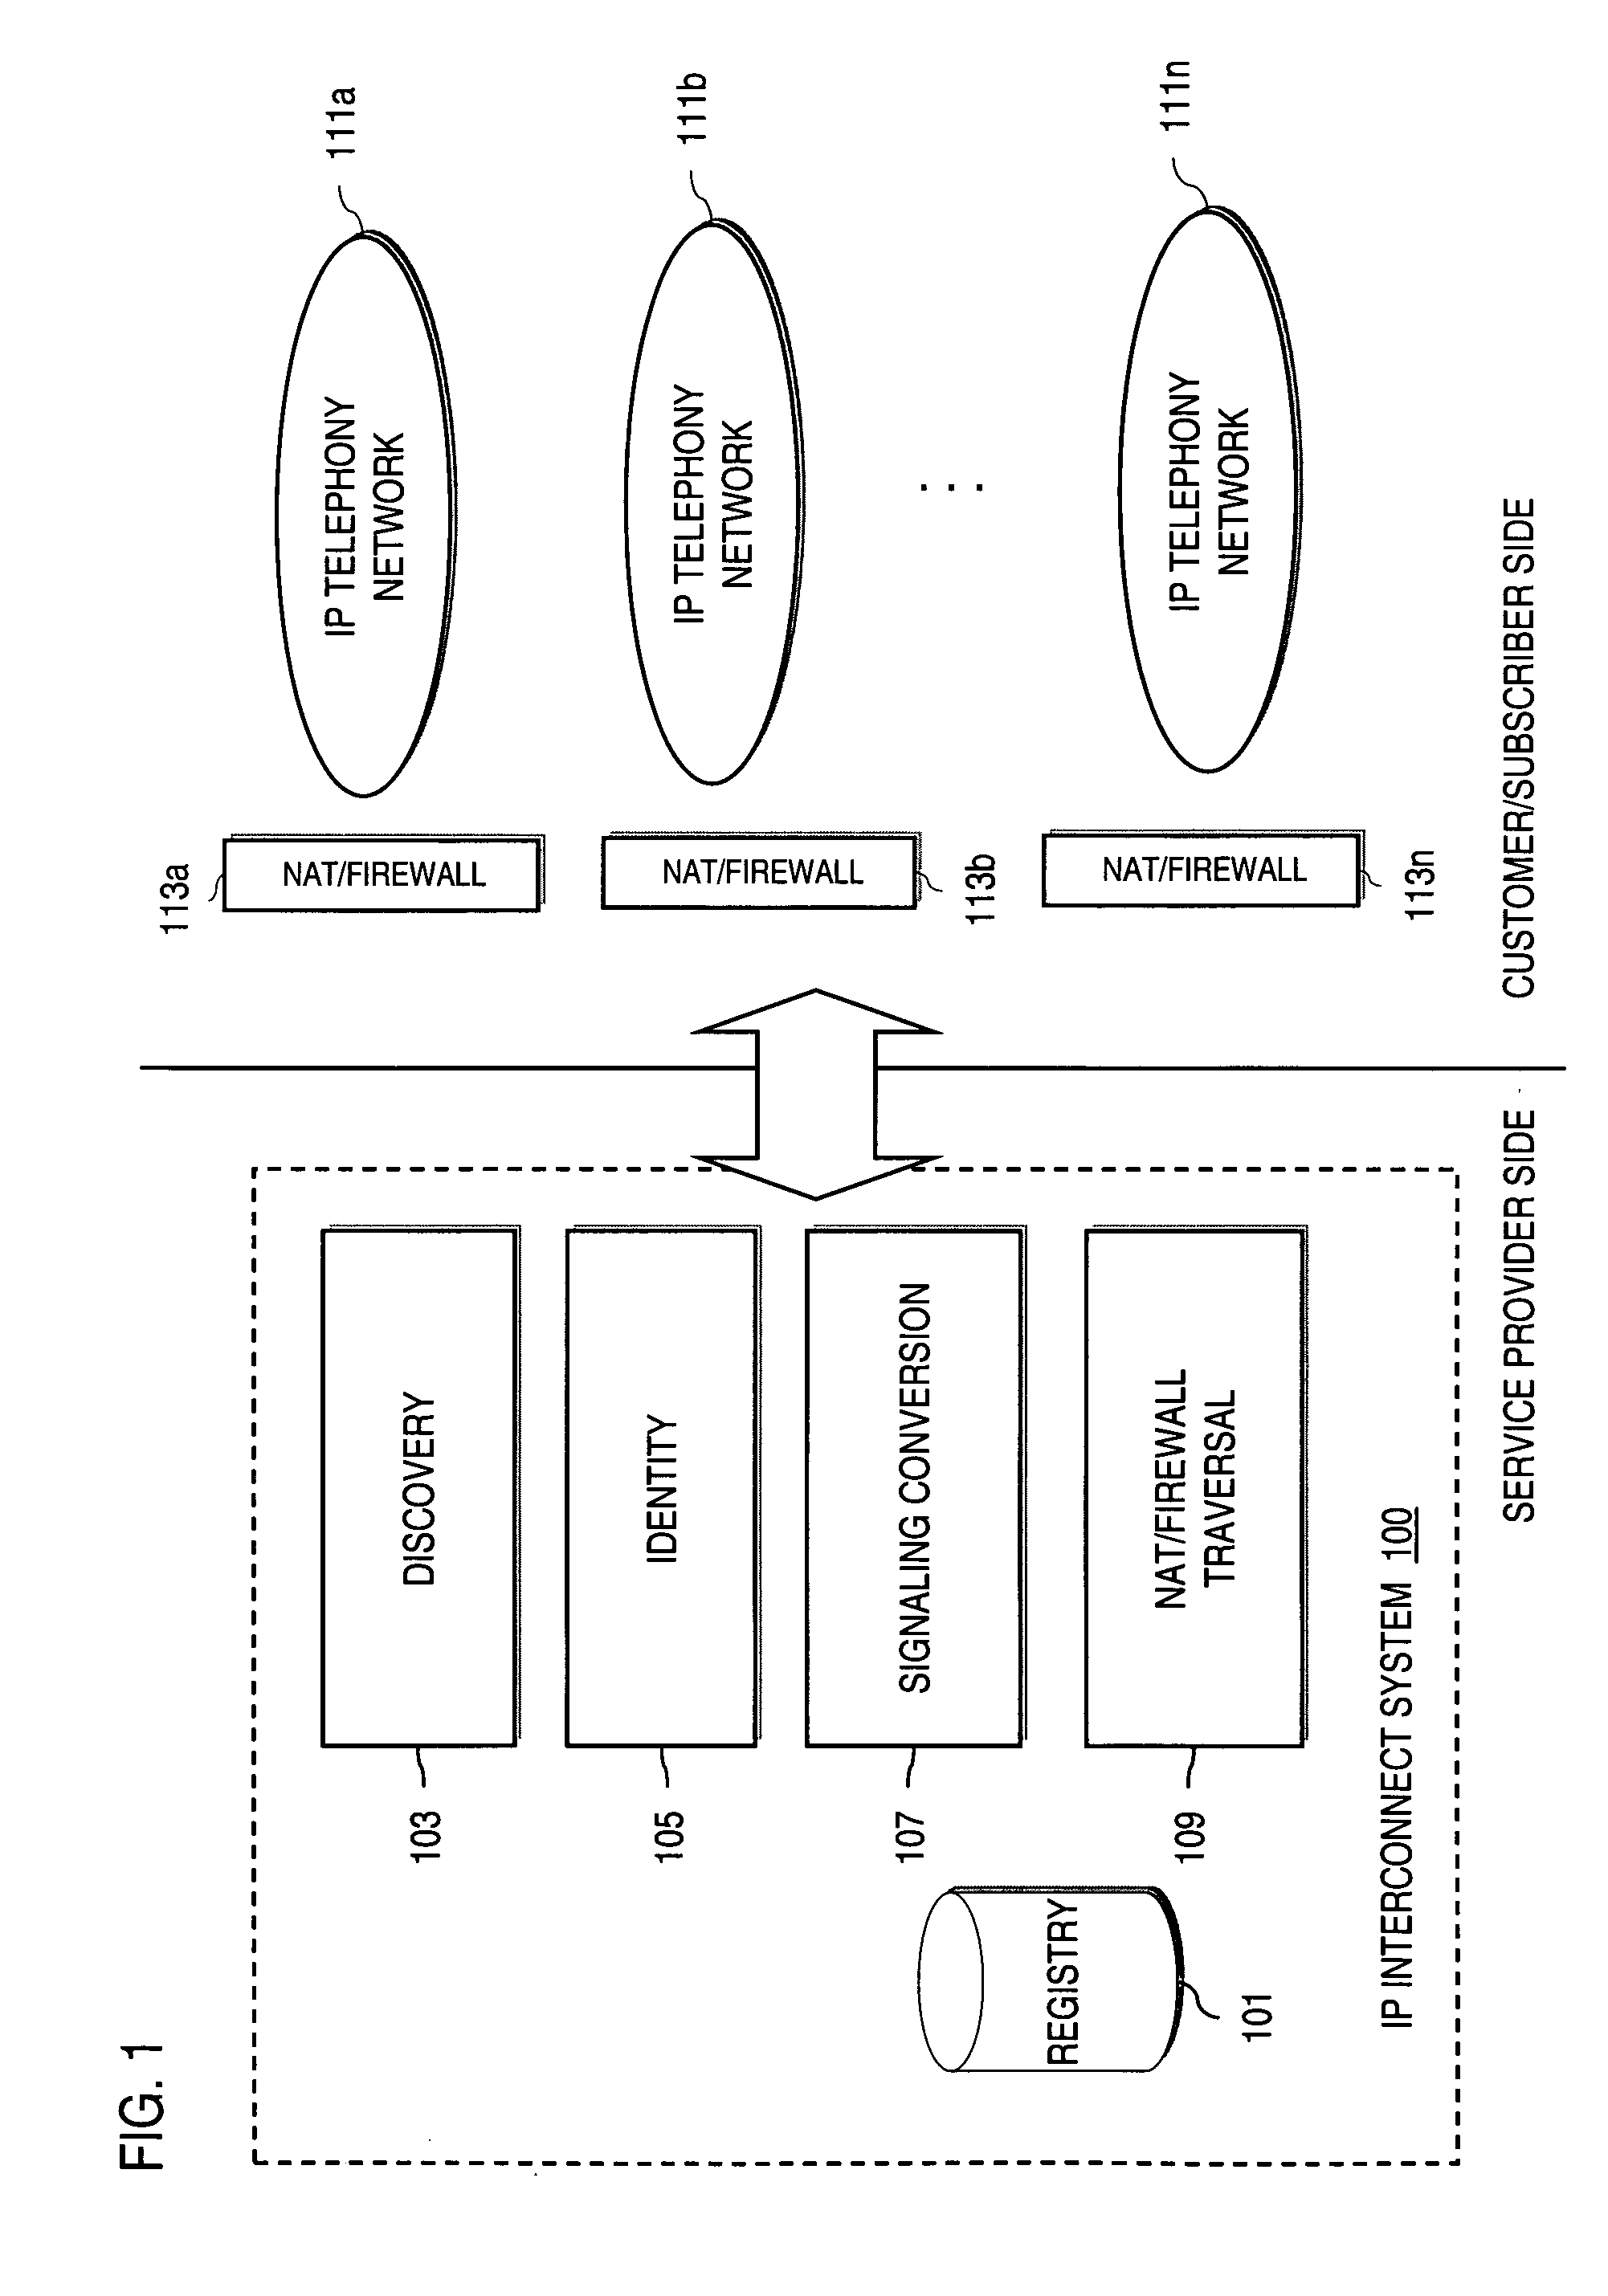 Method and system for providing voice over IP managed services utilizing a centralized data store